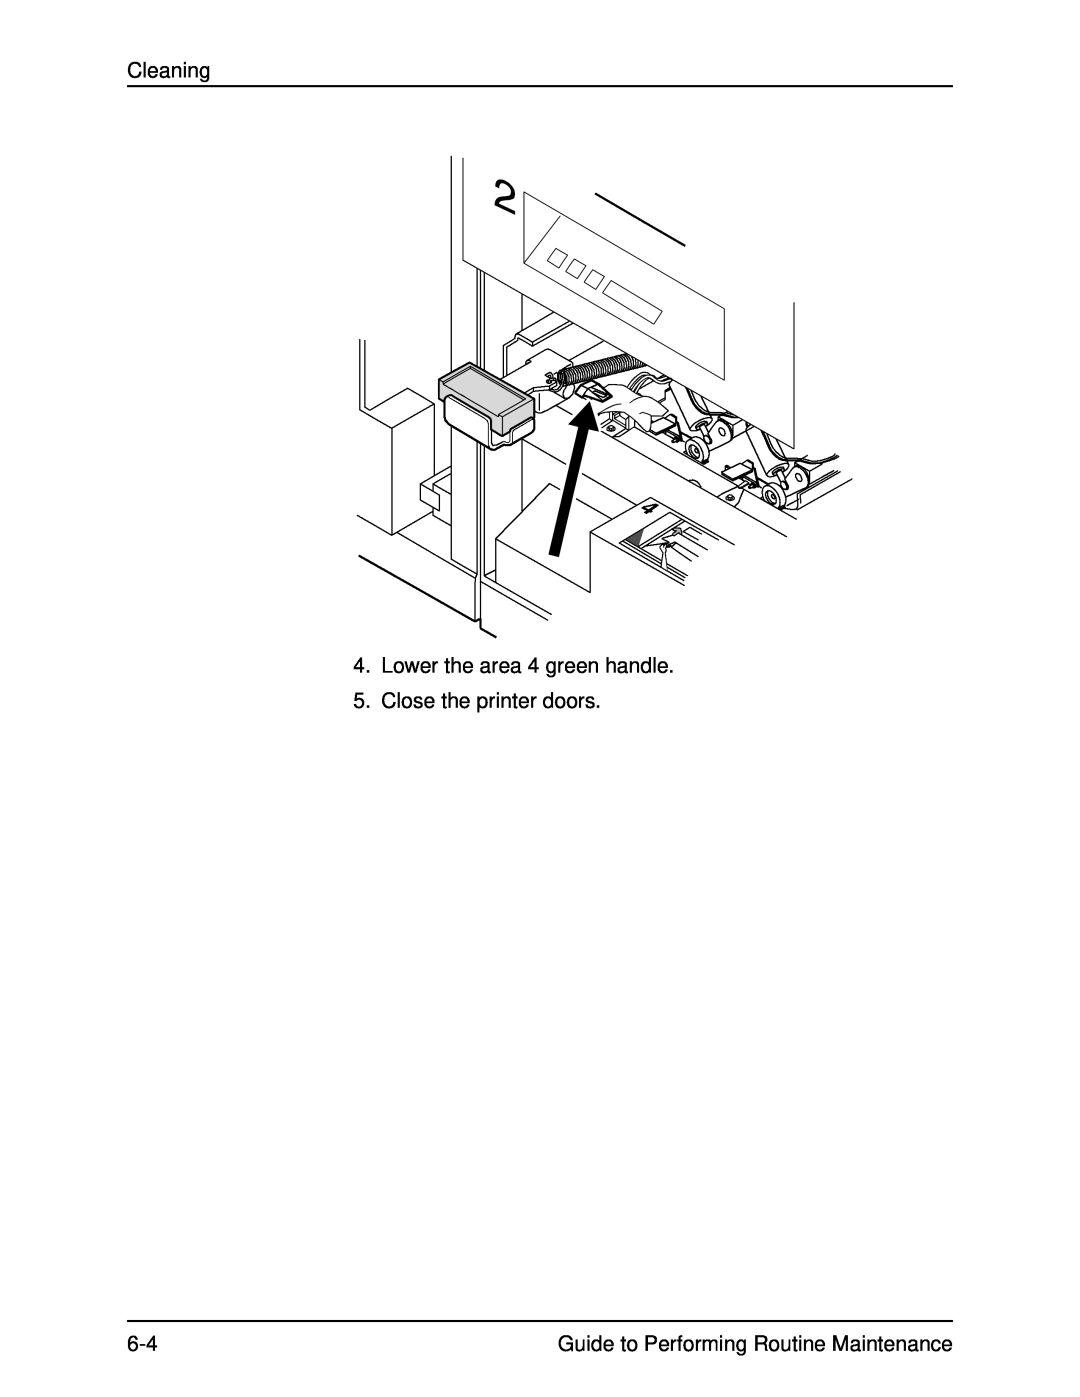 Xerox DocuPrint 96 manual Cleaning, Lower the area 4 green handle 5. Close the printer doors 